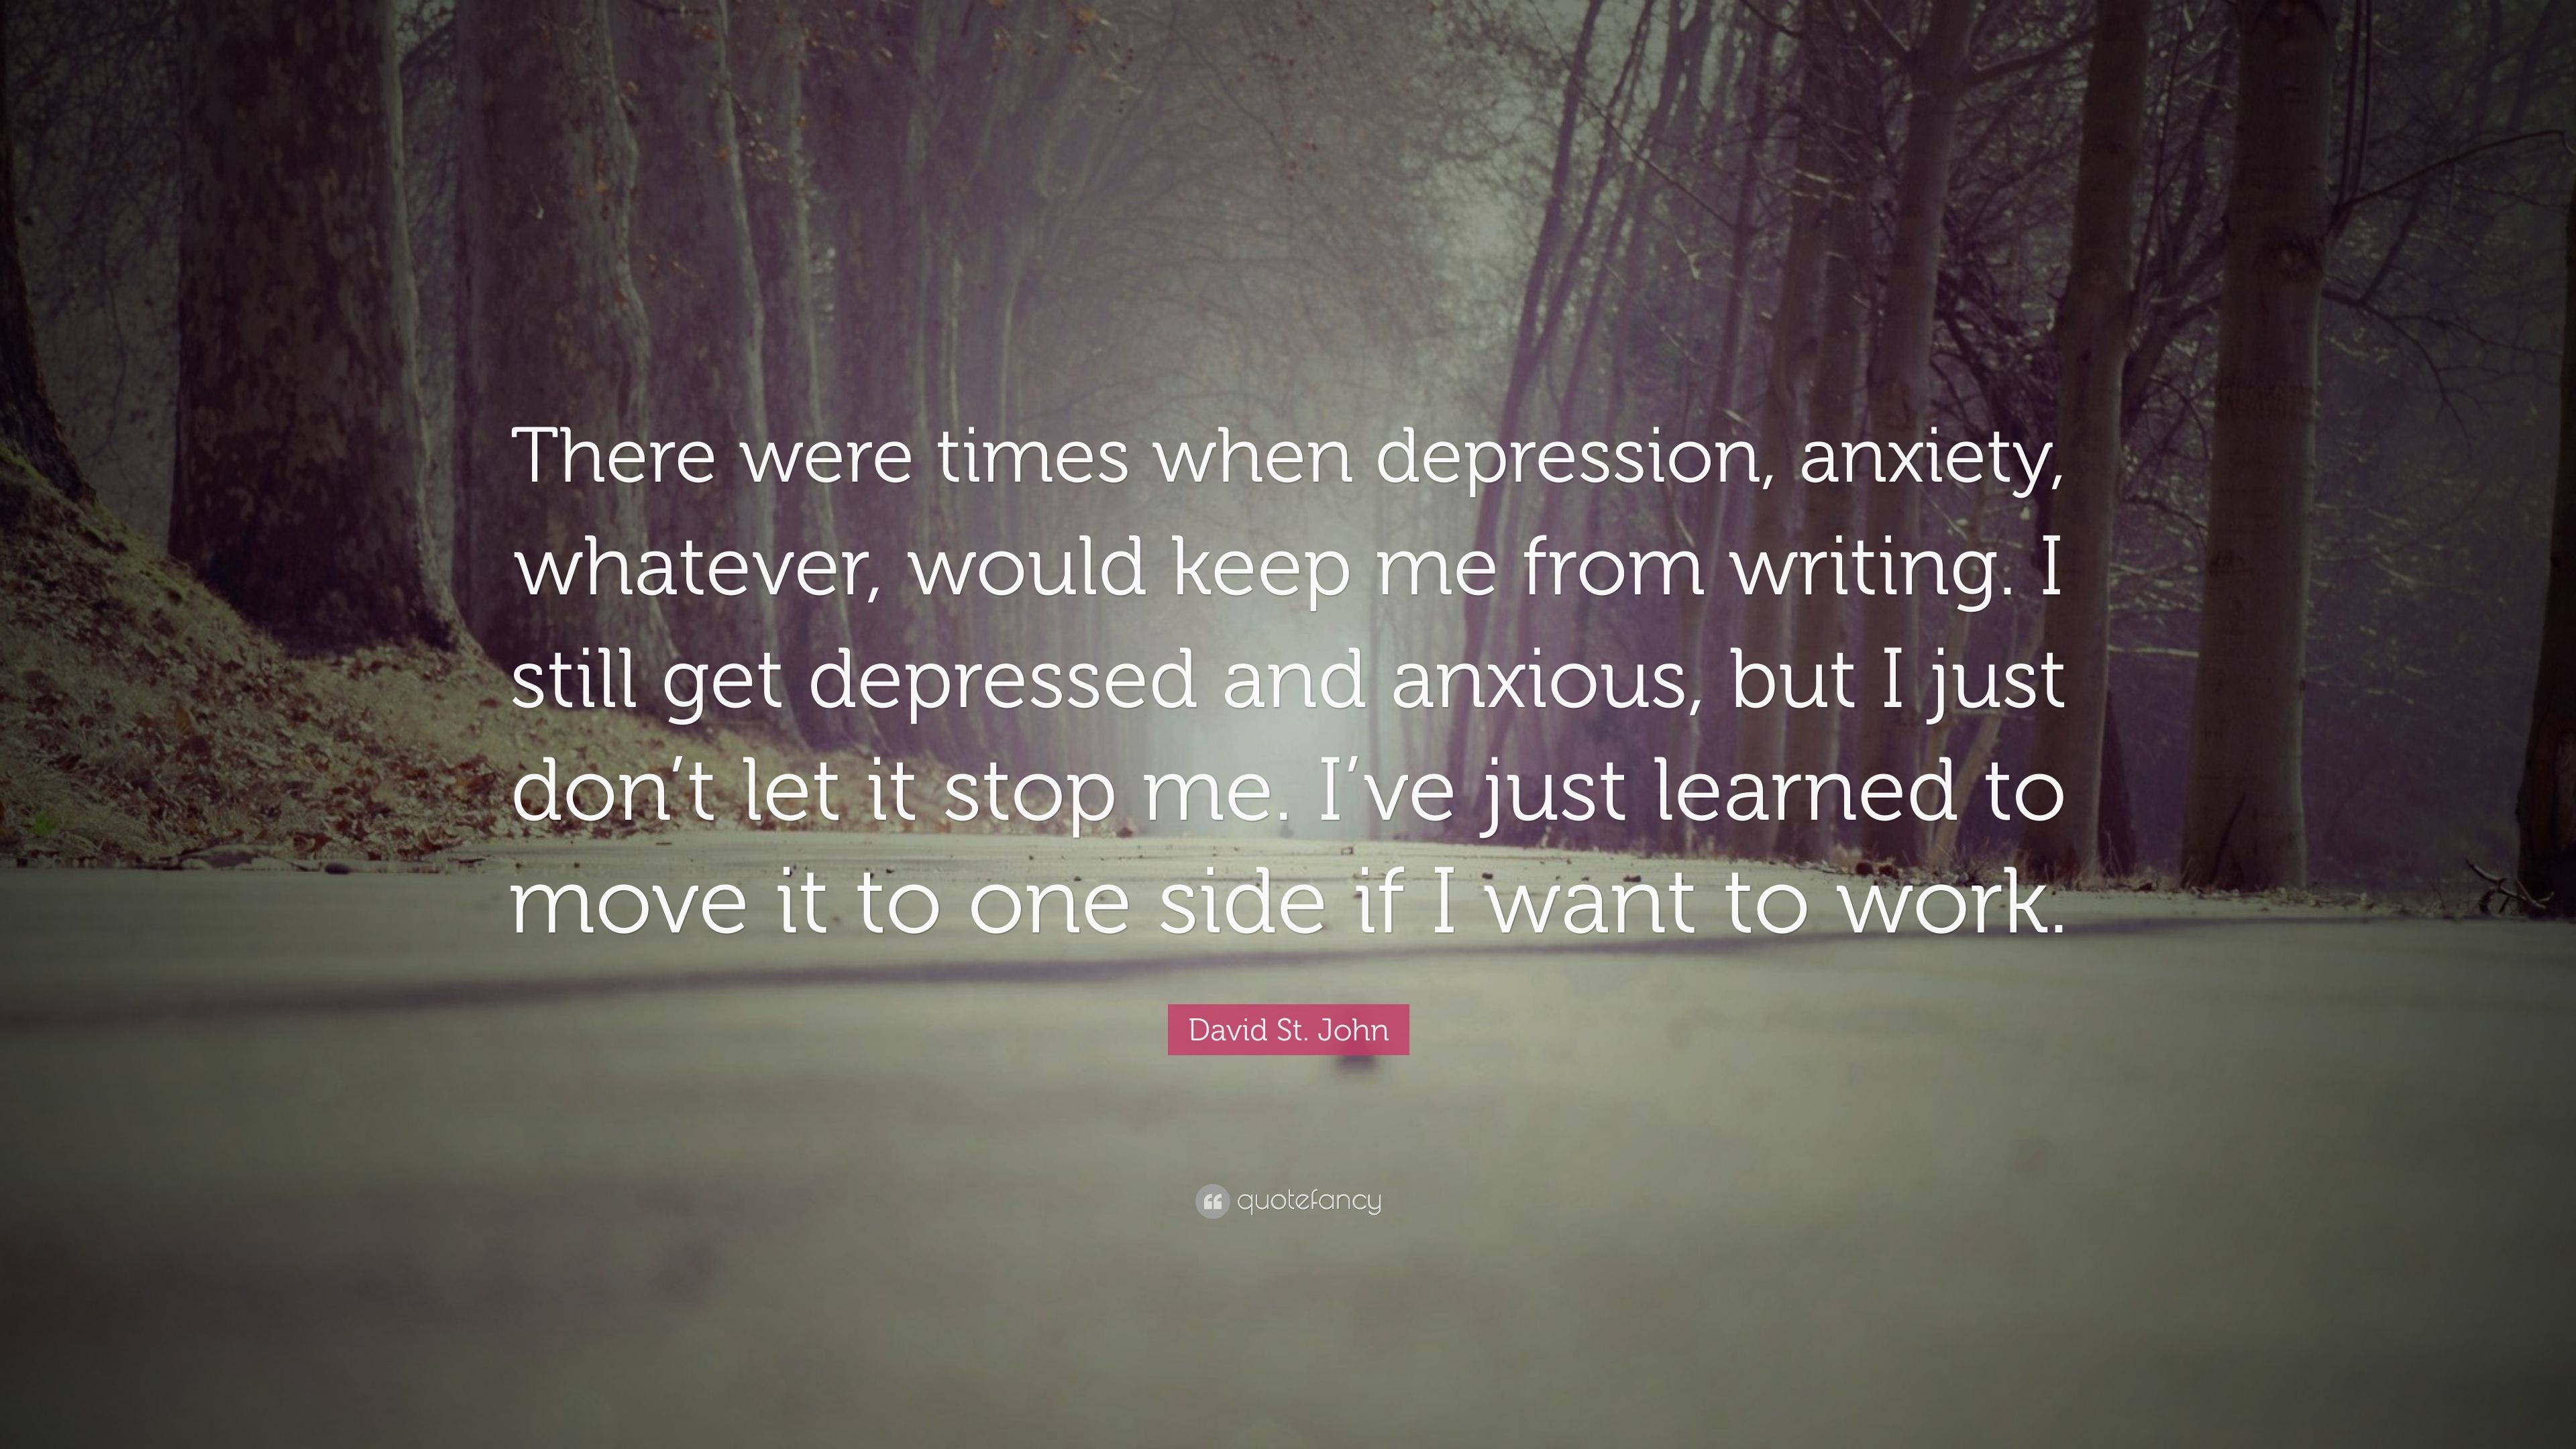 David St. John Quote: “There were times when depression, anxiety, whatever, would keep me from writing. I still get depressed and anxious, but .” (7 wallpaper)